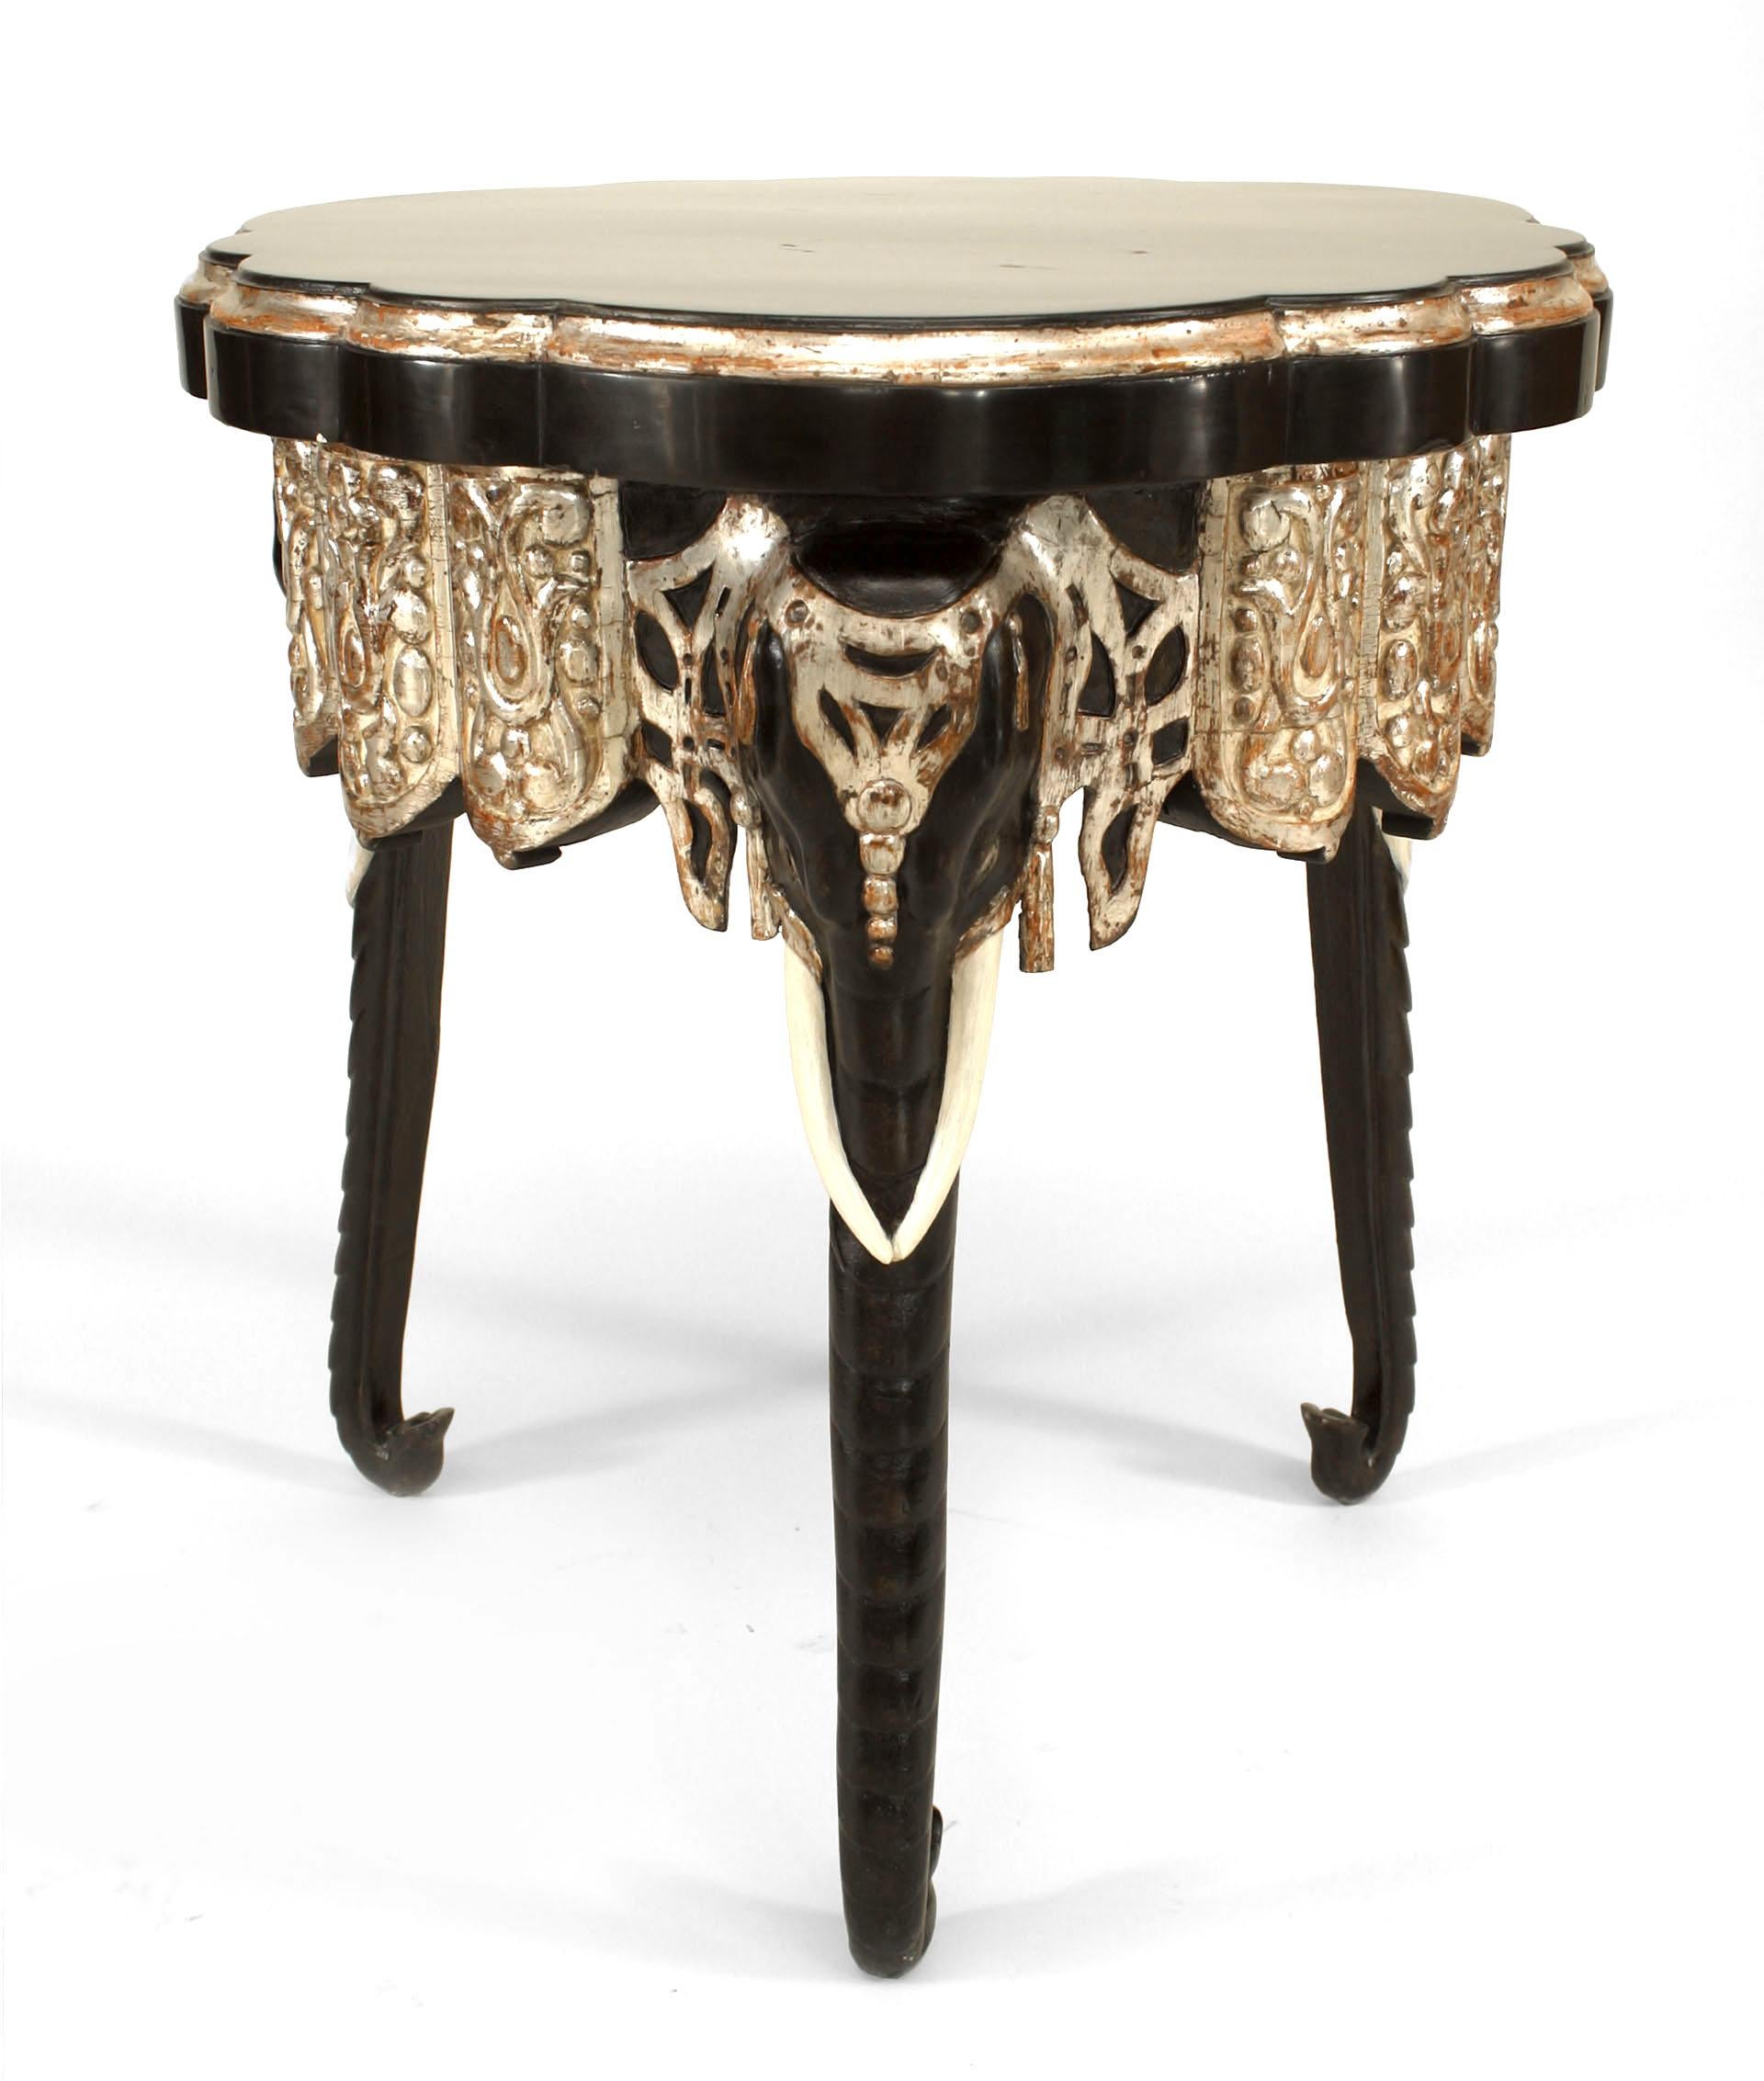 English Regency (Anglo-Indian) (Mid-19th Century) style black lacquered and parcel silver gilt carved and trimmed side table with scallop design edged top on 3 elephant mask legs.
